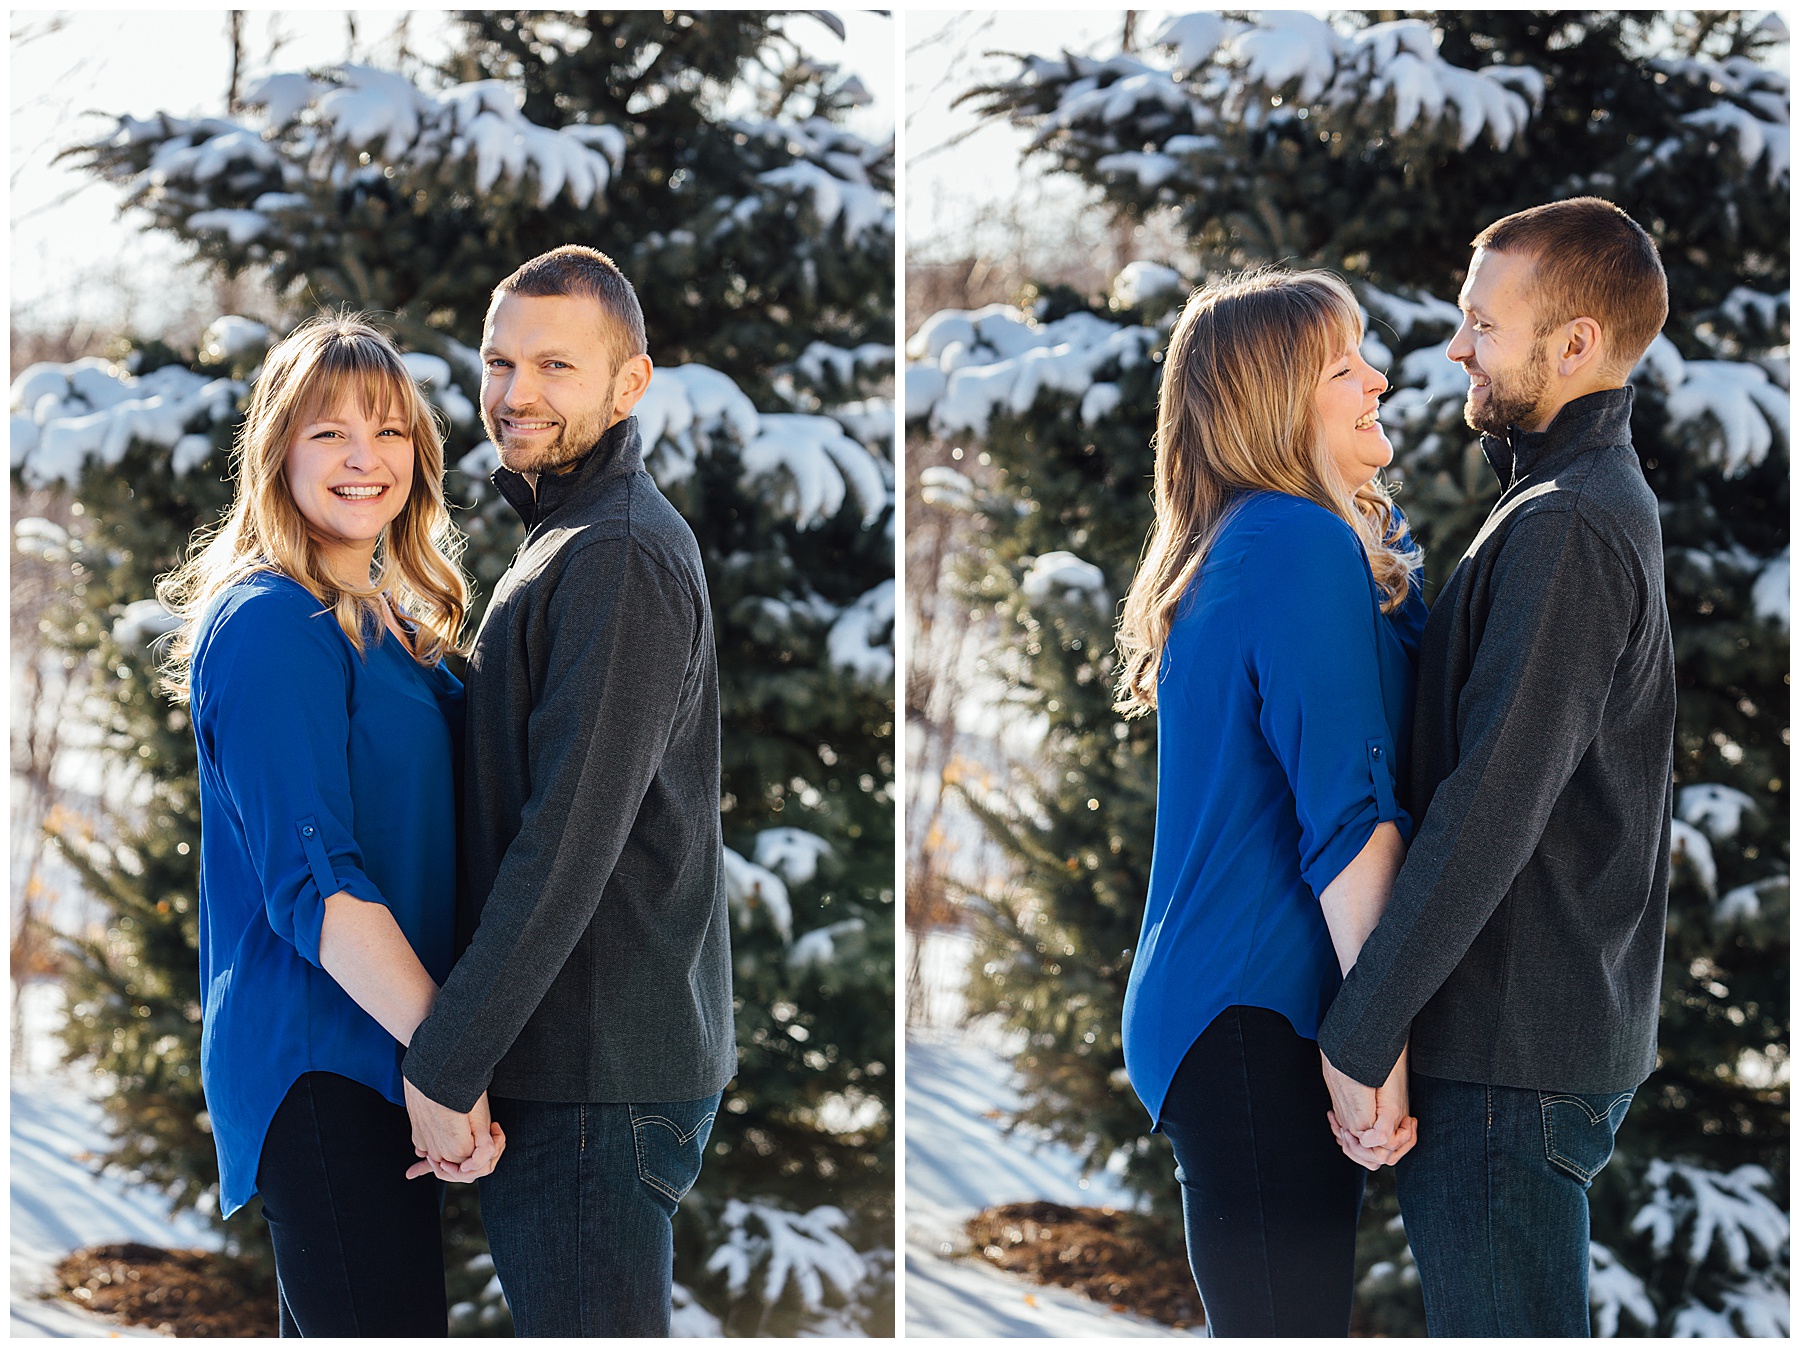 Engagement photos with snow on trees